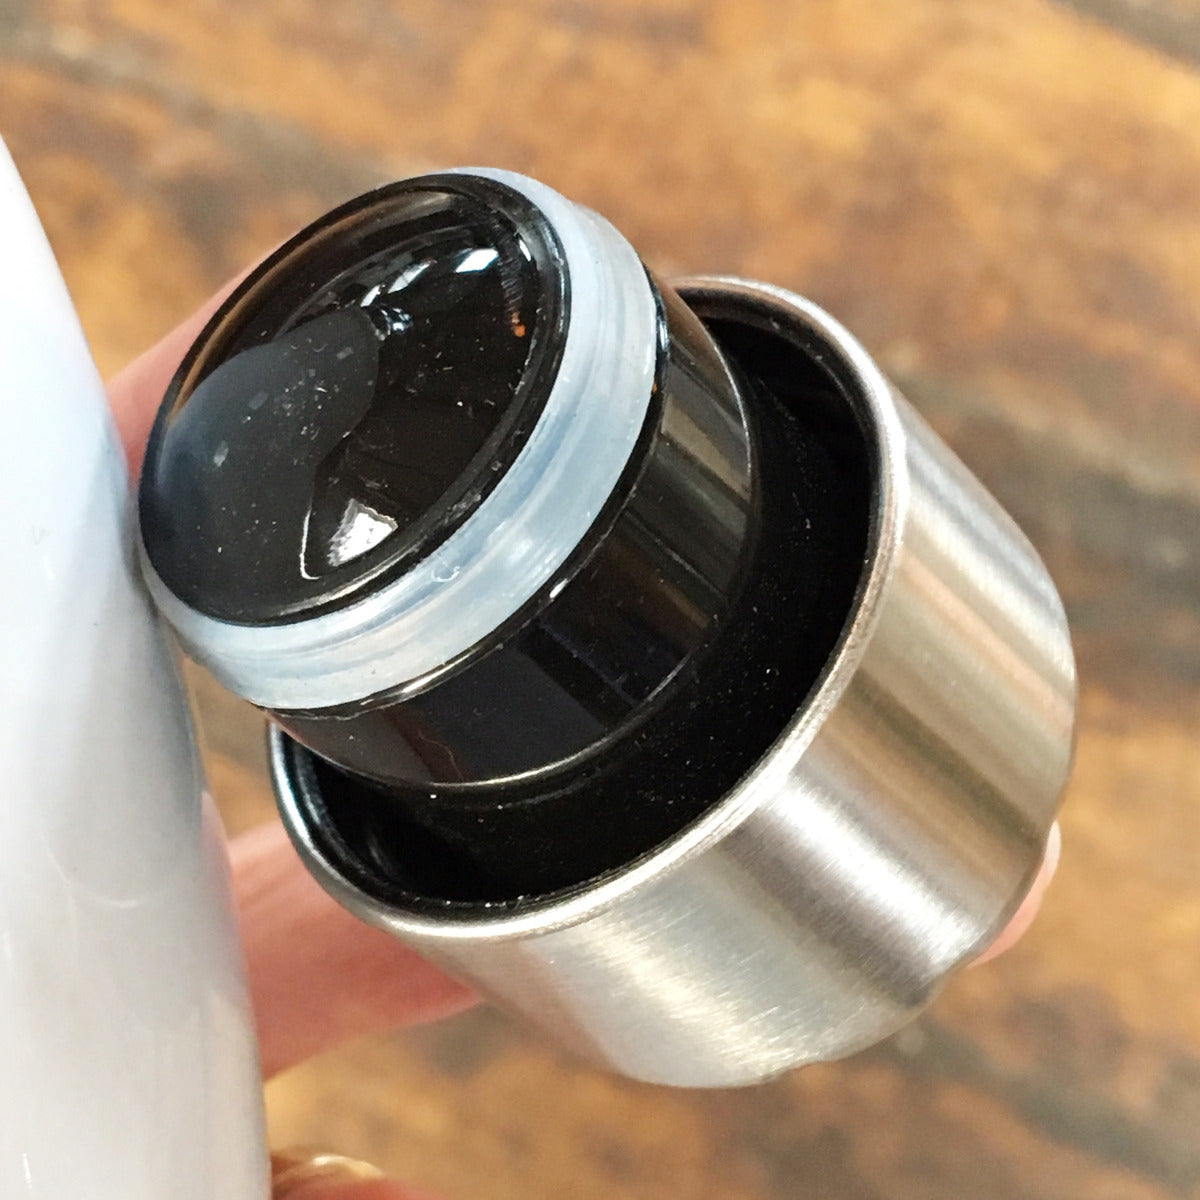 Photo showing the inside of the bottle lid, with the rubber seal.